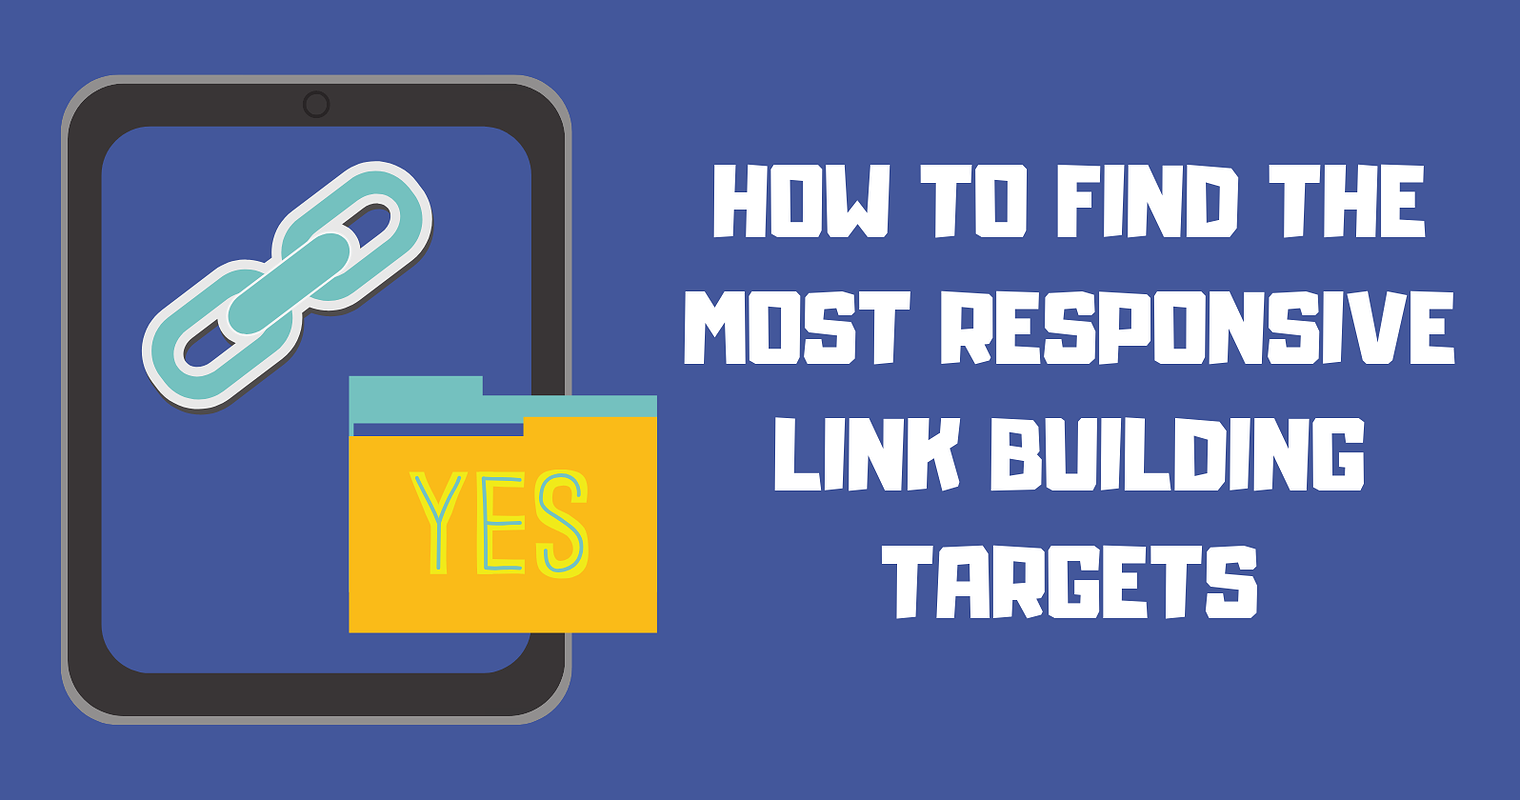 How You Can Find the Most Responsive Link Building Targets